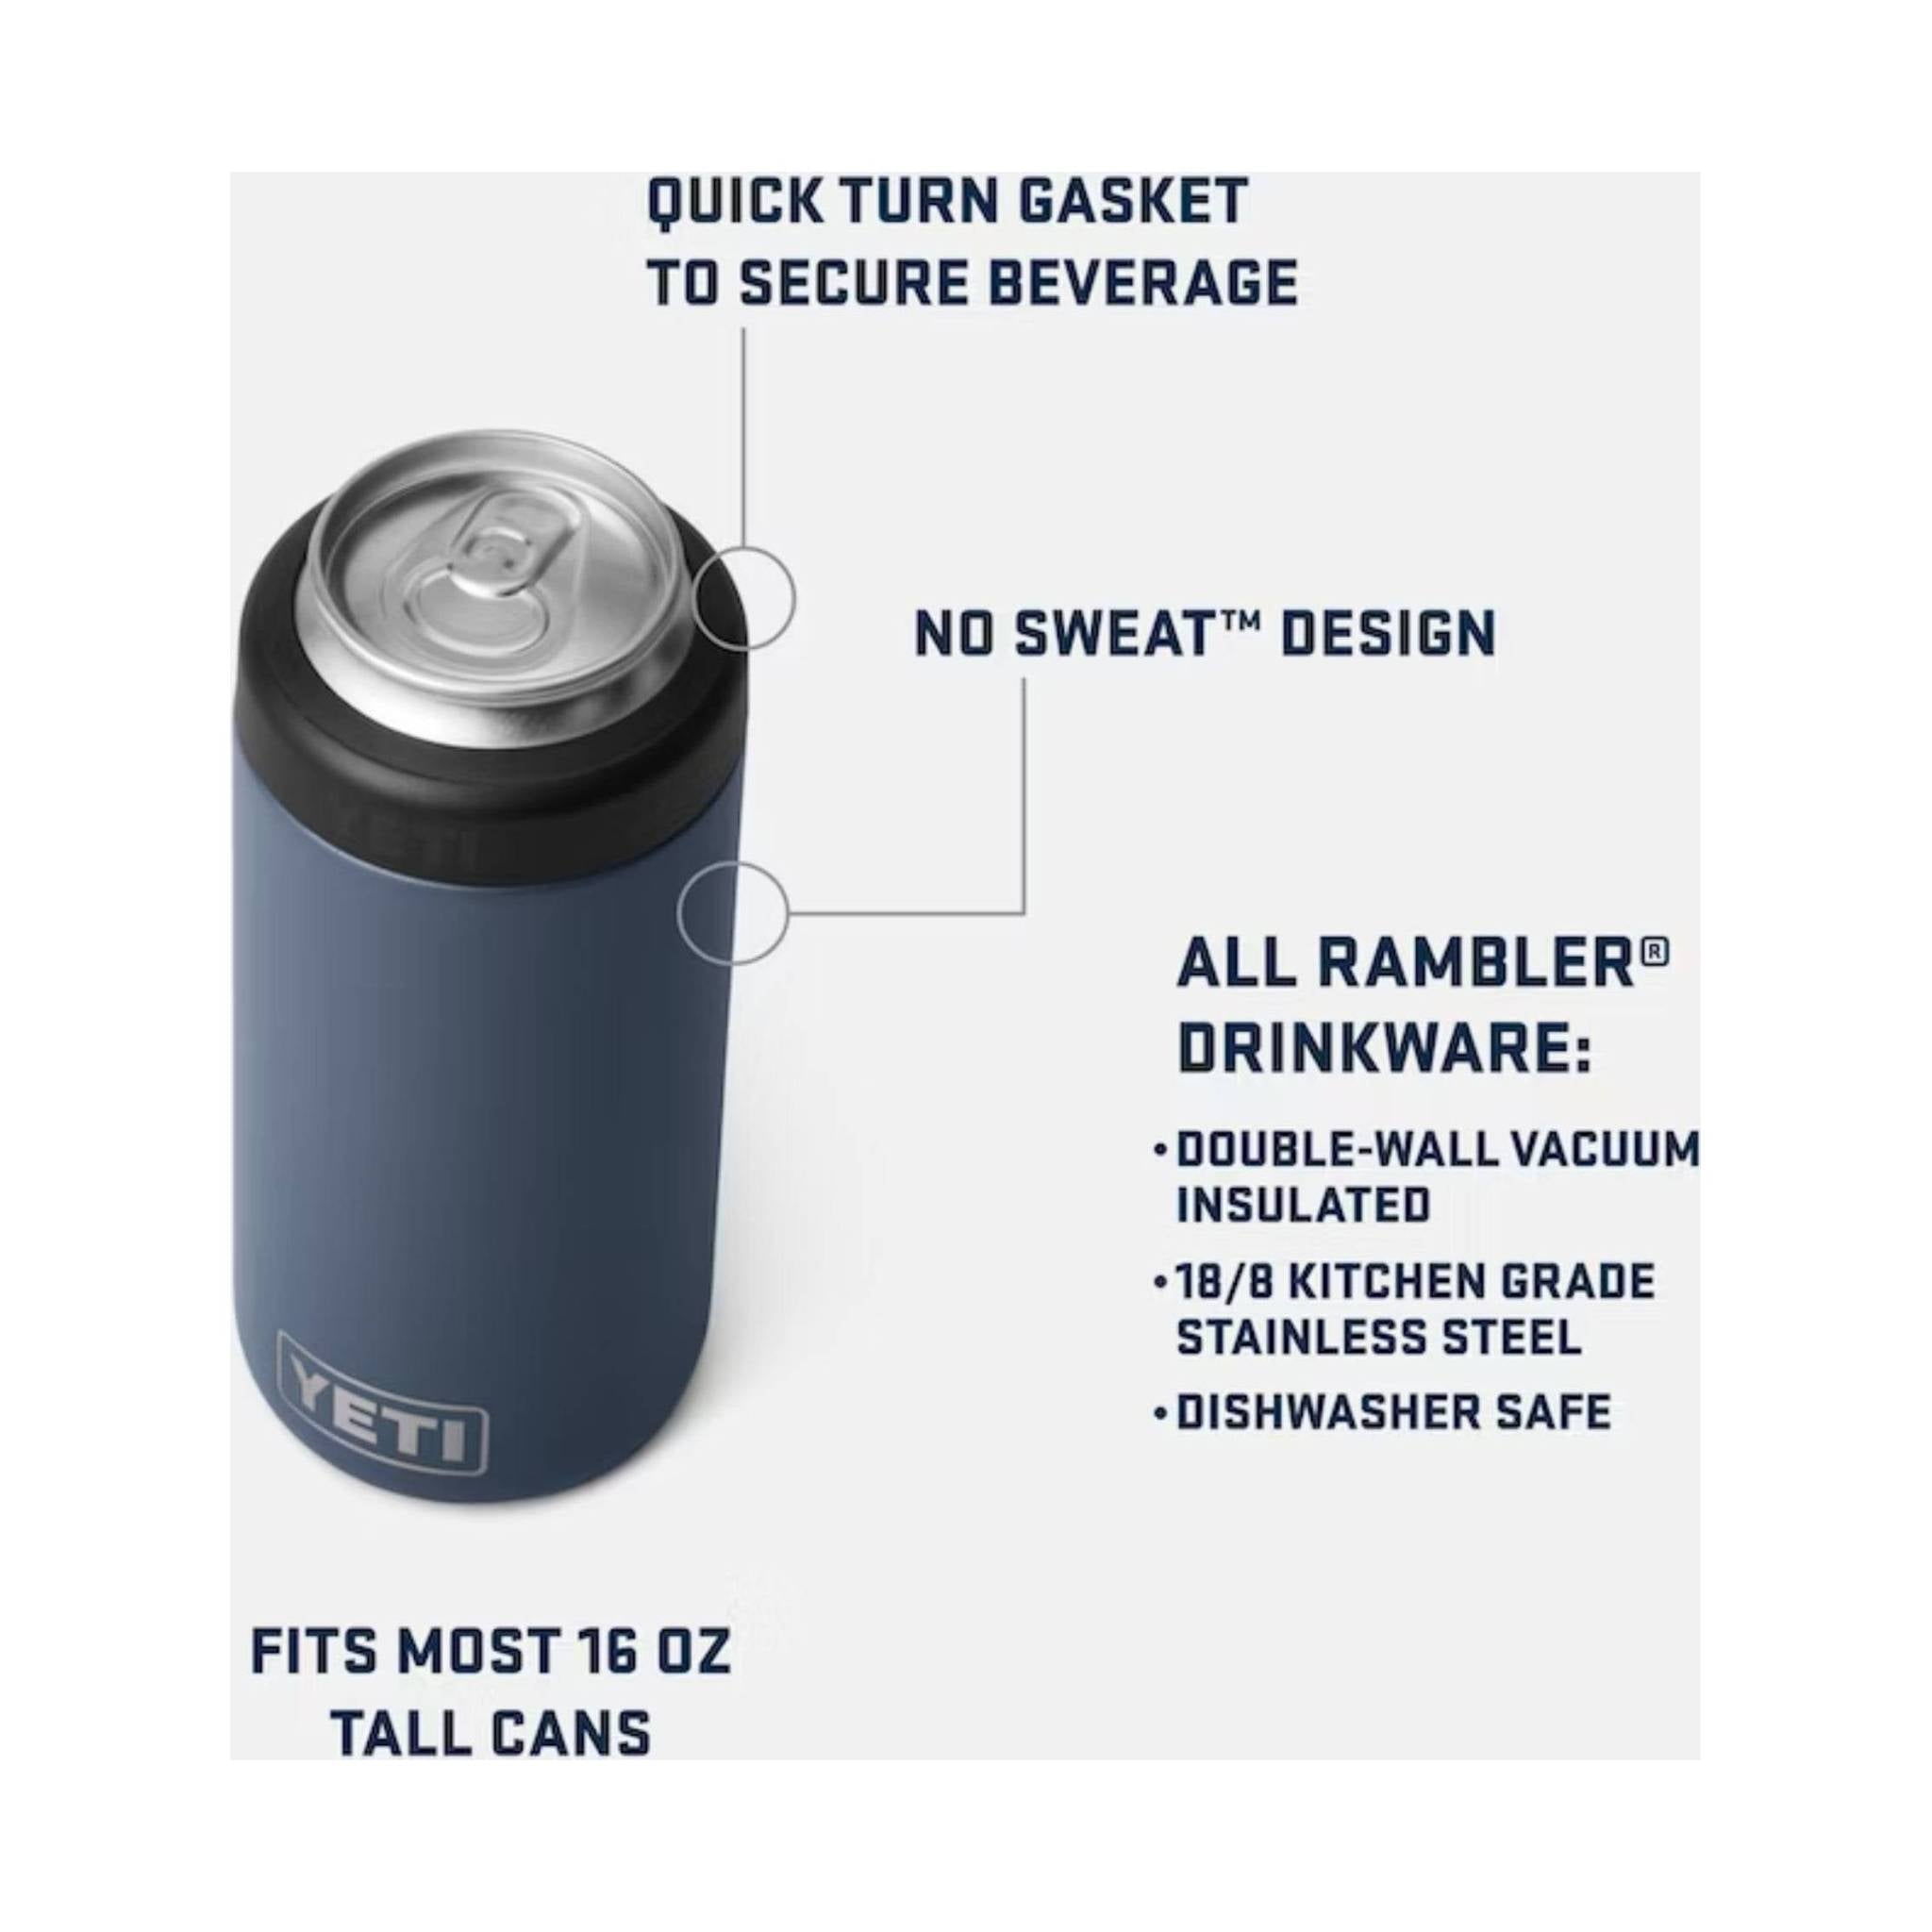  YETI Rambler 12 oz. Colster Can Insulator for Standard Size  Cans, Black (NO CAN INSERT): Home & Kitchen